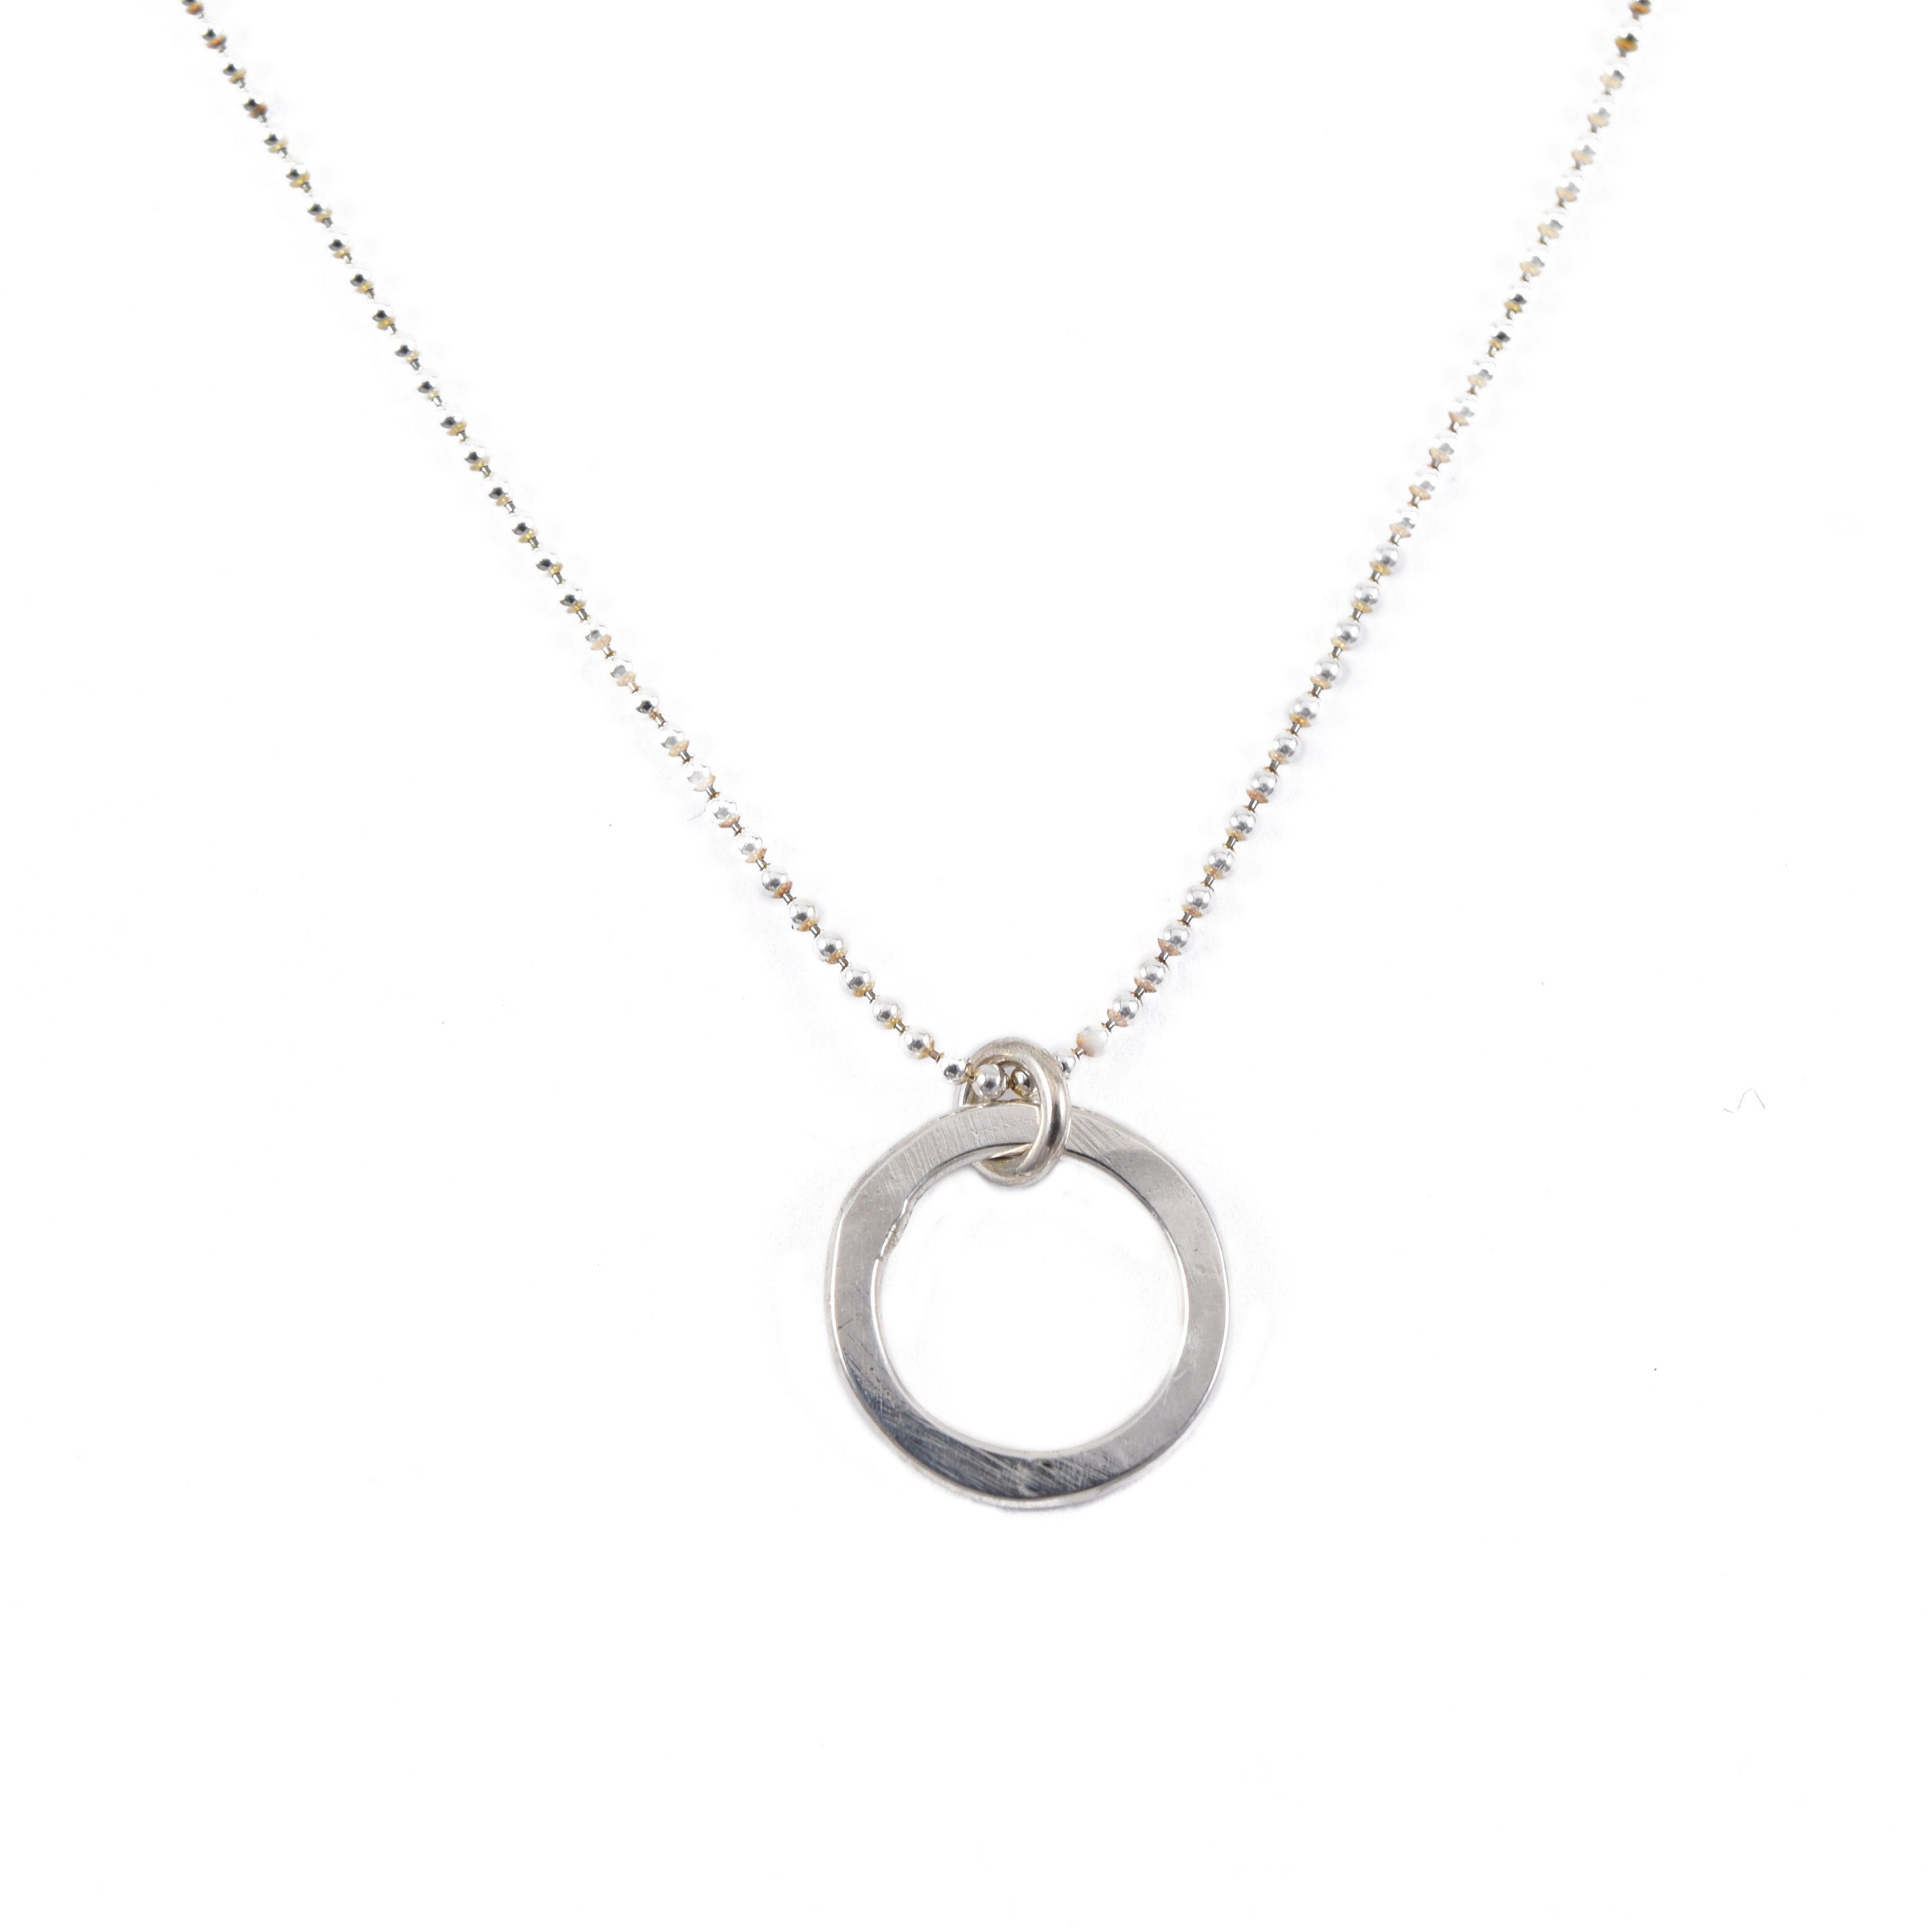 Sterling Silver Circle Pendant Necklace • Hammered/Sparkly 16-24” •  Handmade UK | eBay